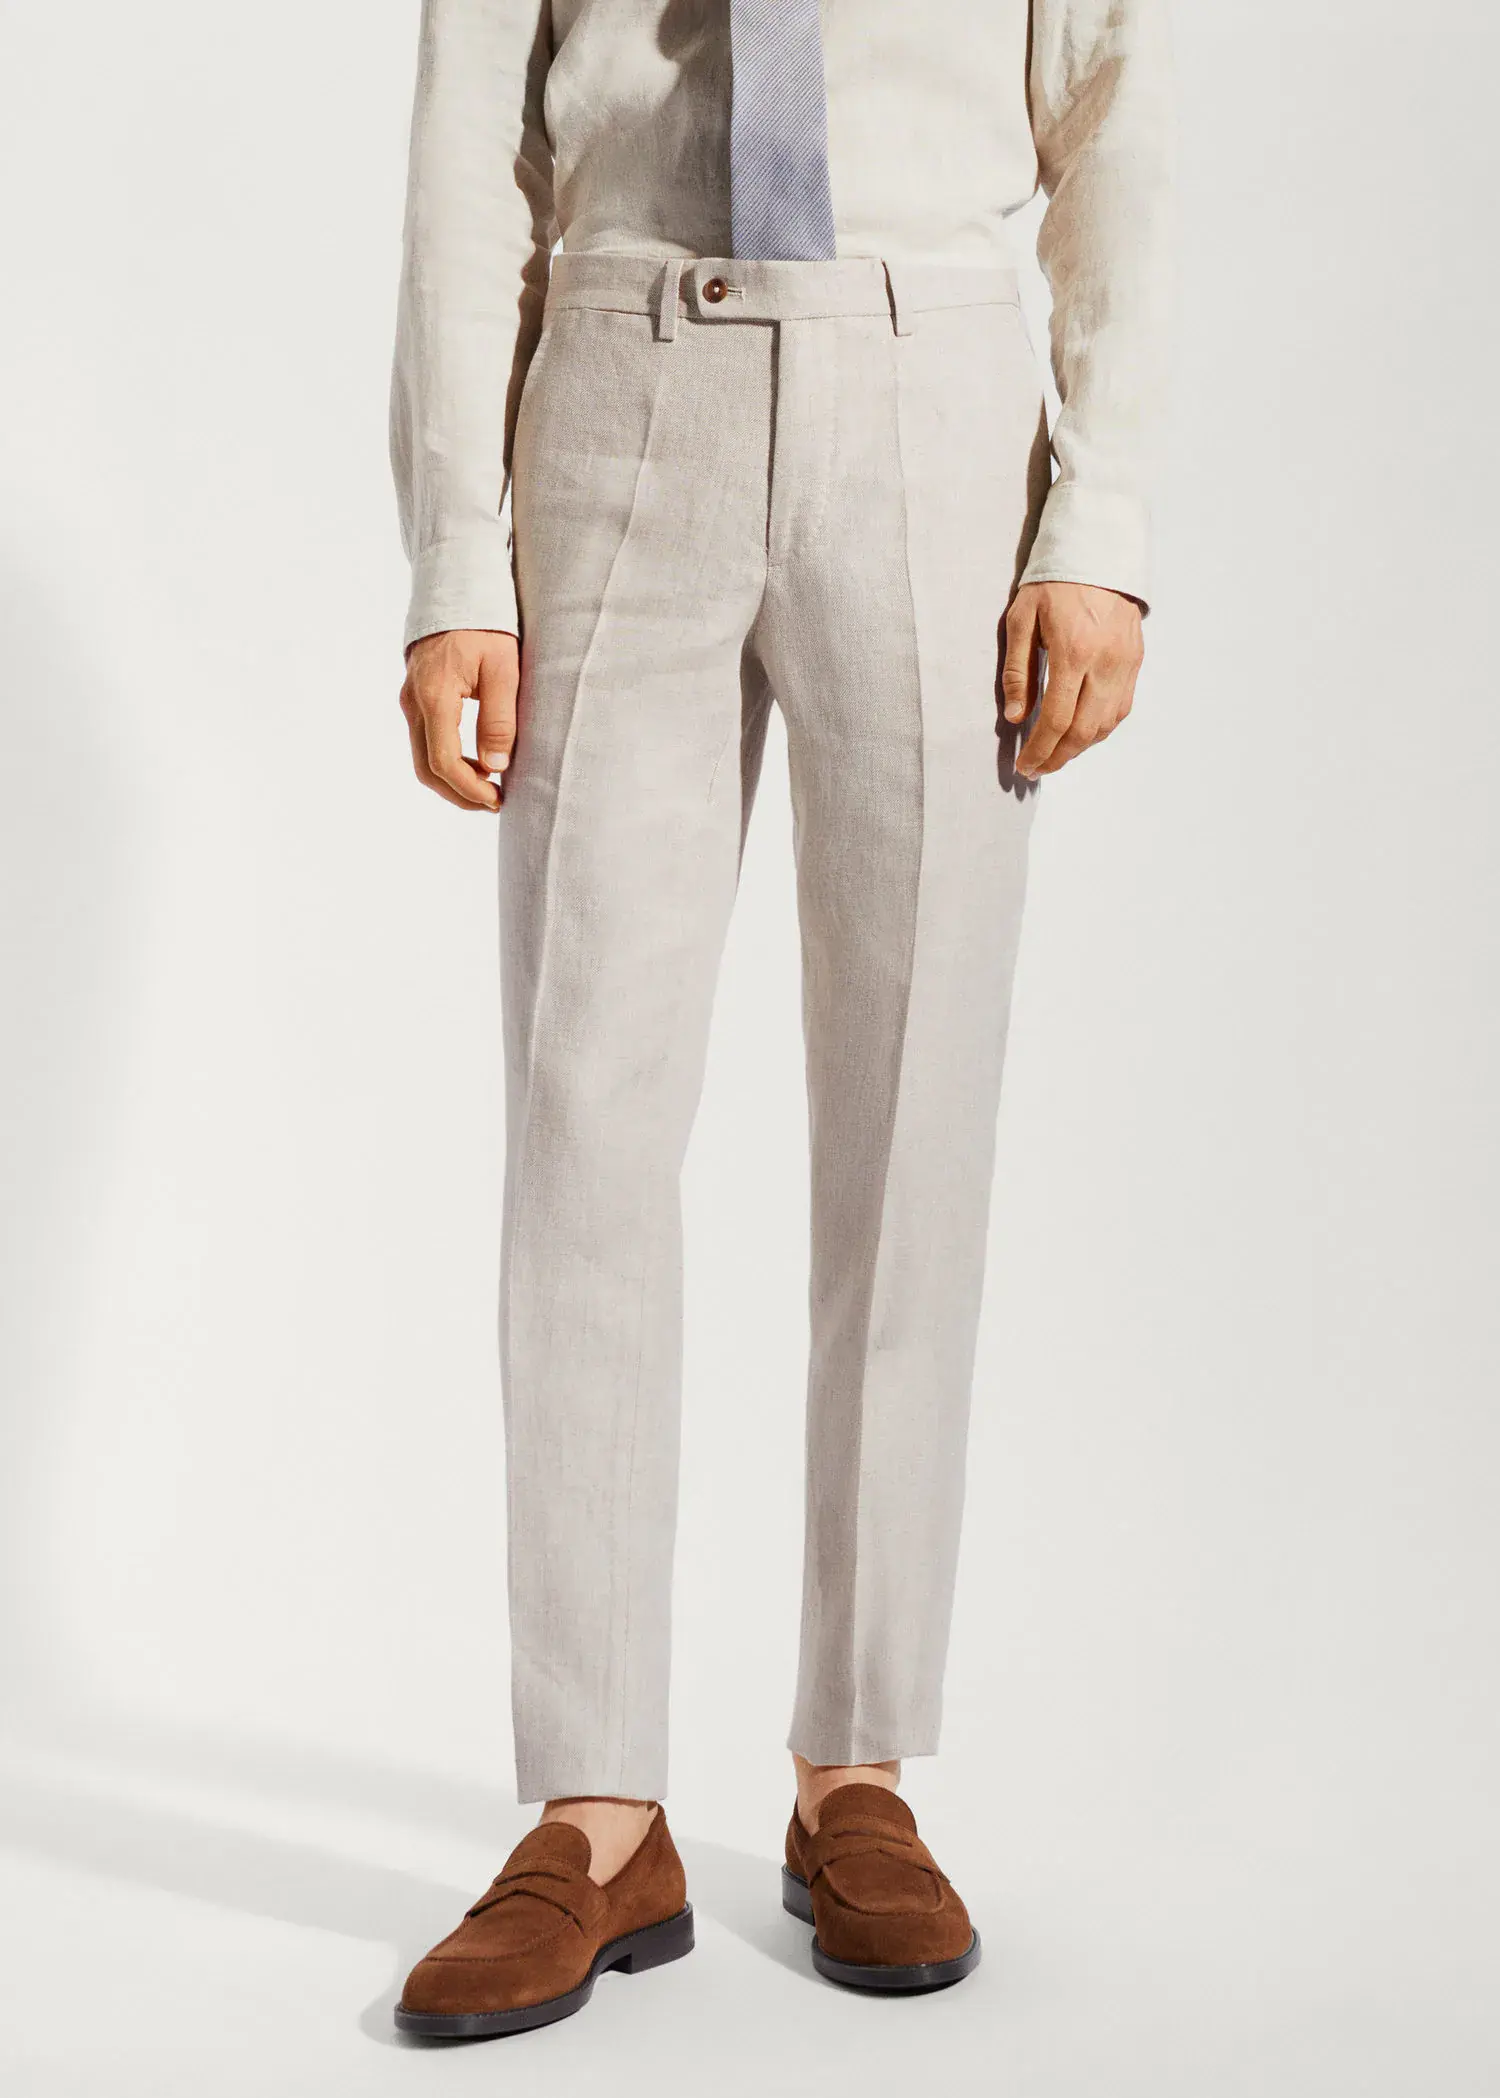 Mango 100% linen suit trousers. a man wearing a suit standing in front of a white wall. 